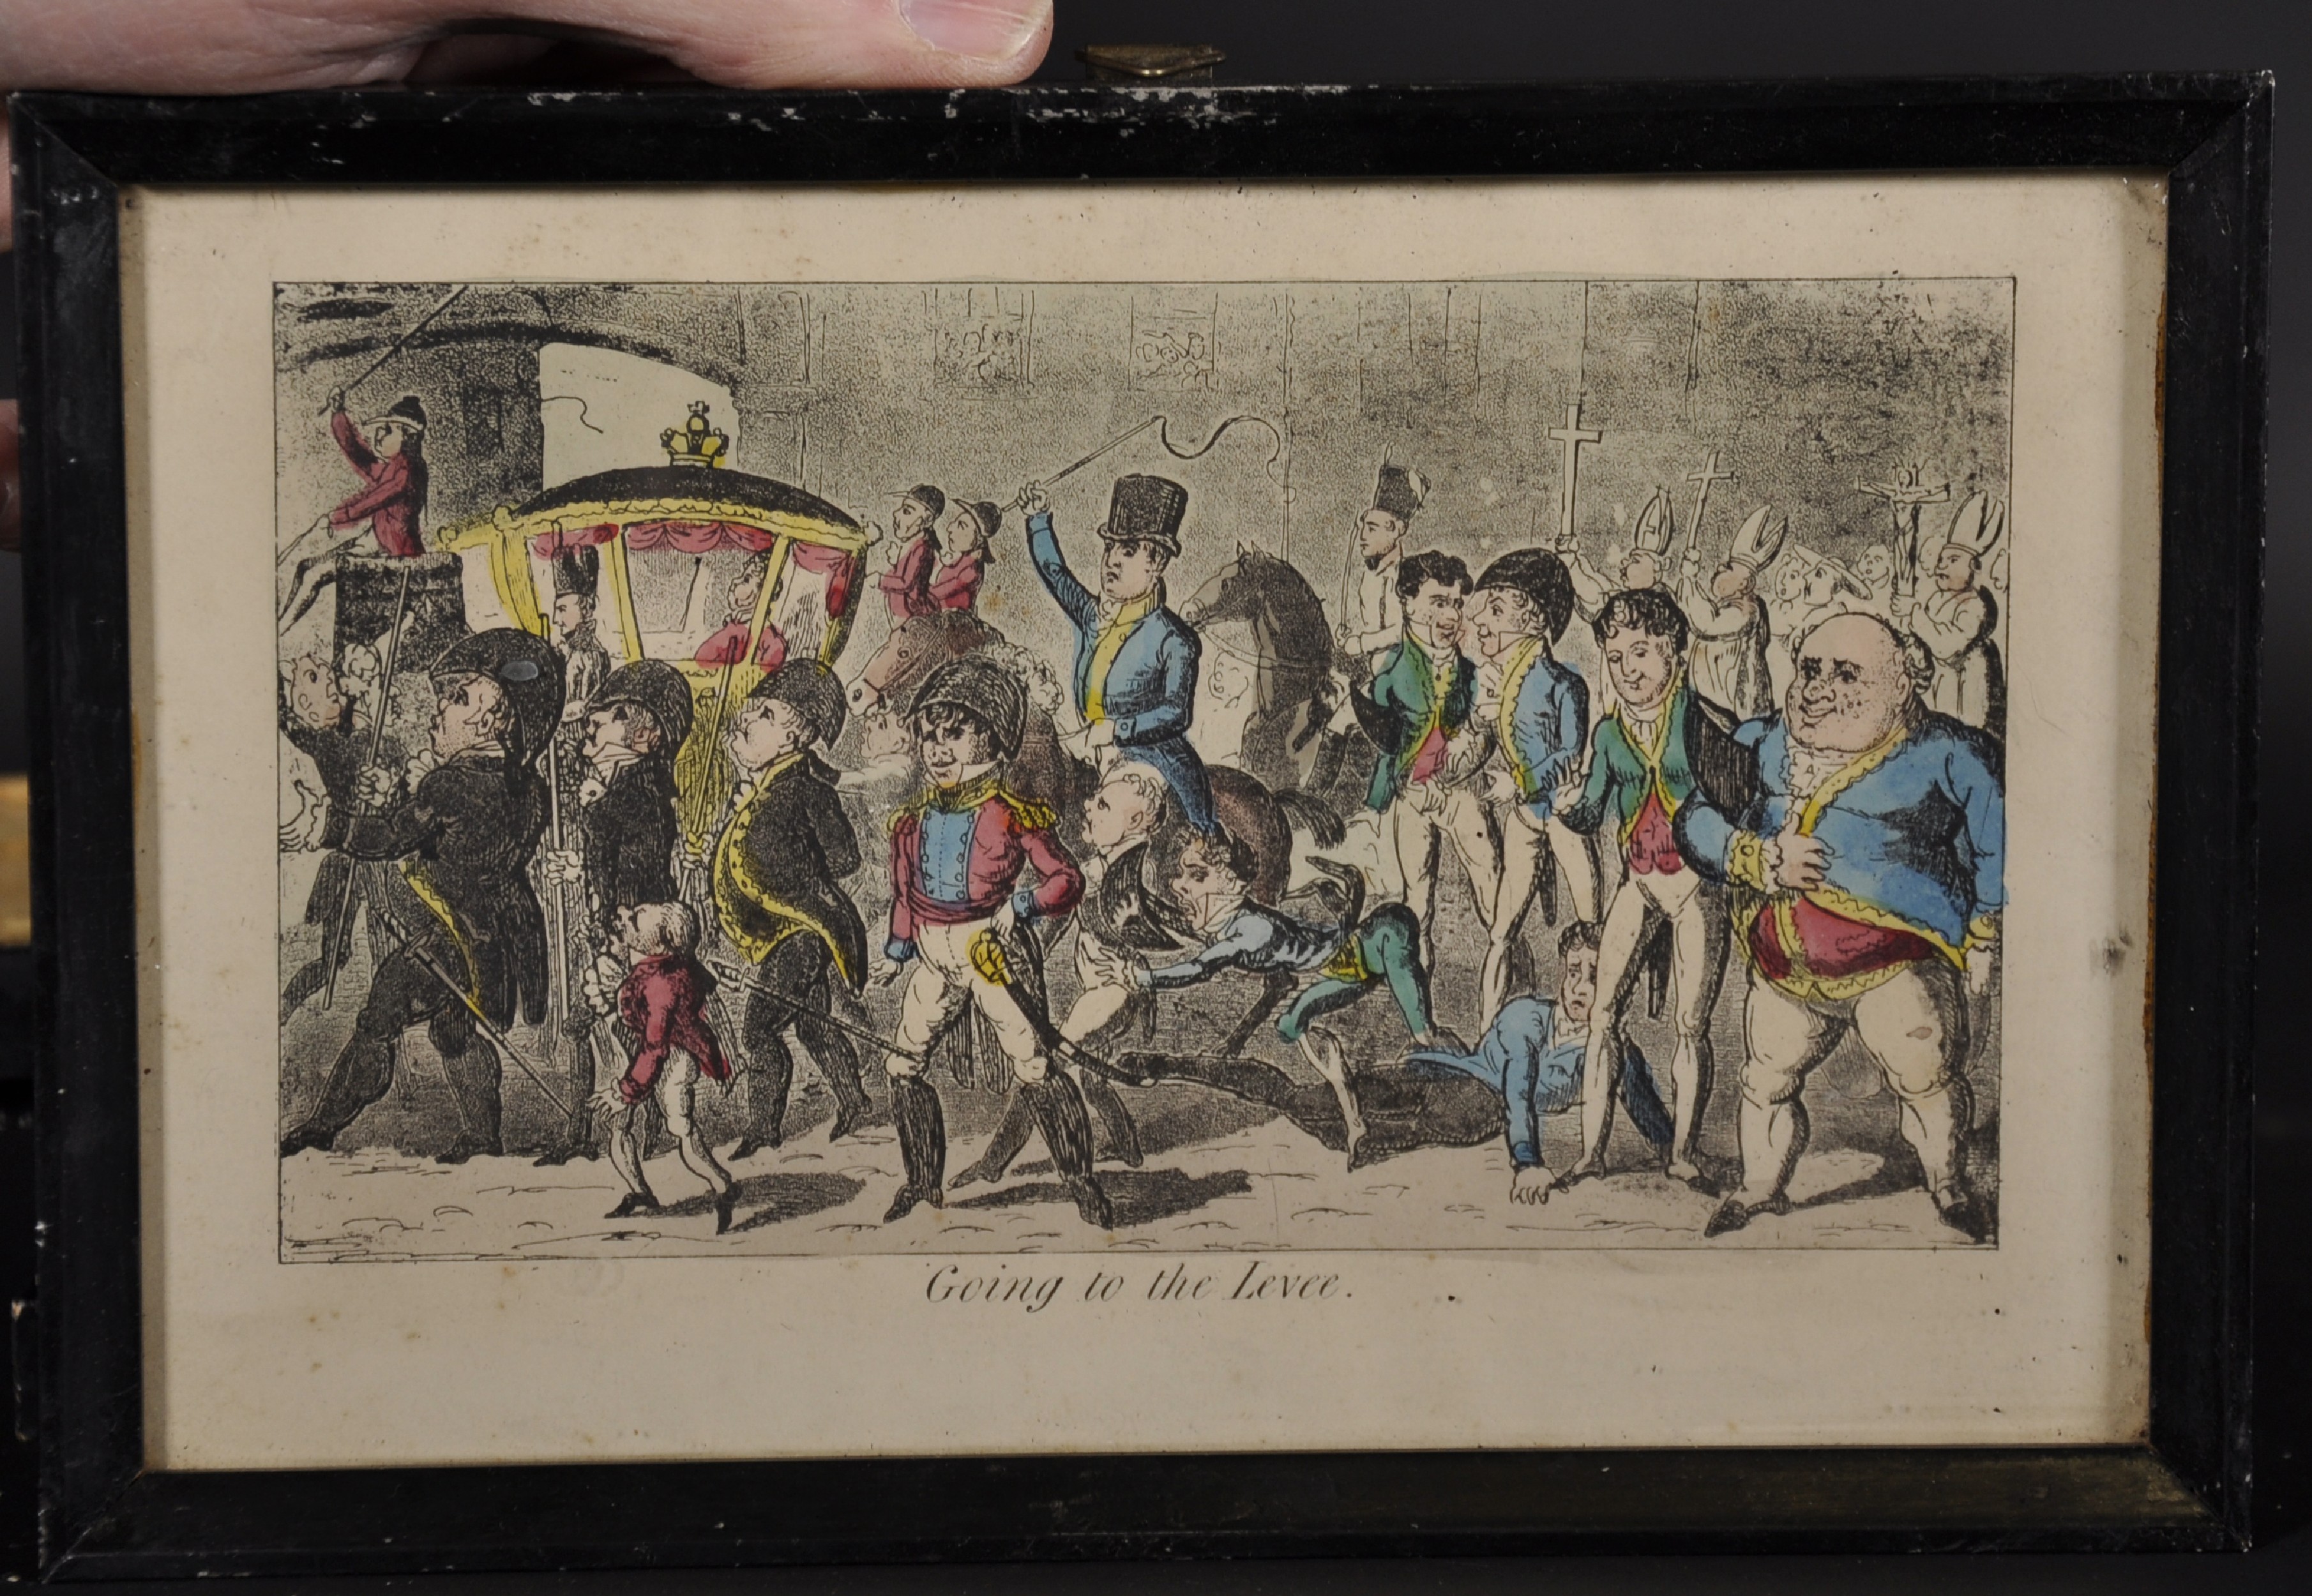 19th Century English School. "Wetting an Irish Commission", Print, 3.75" x 7.25", and Five others - Image 6 of 8